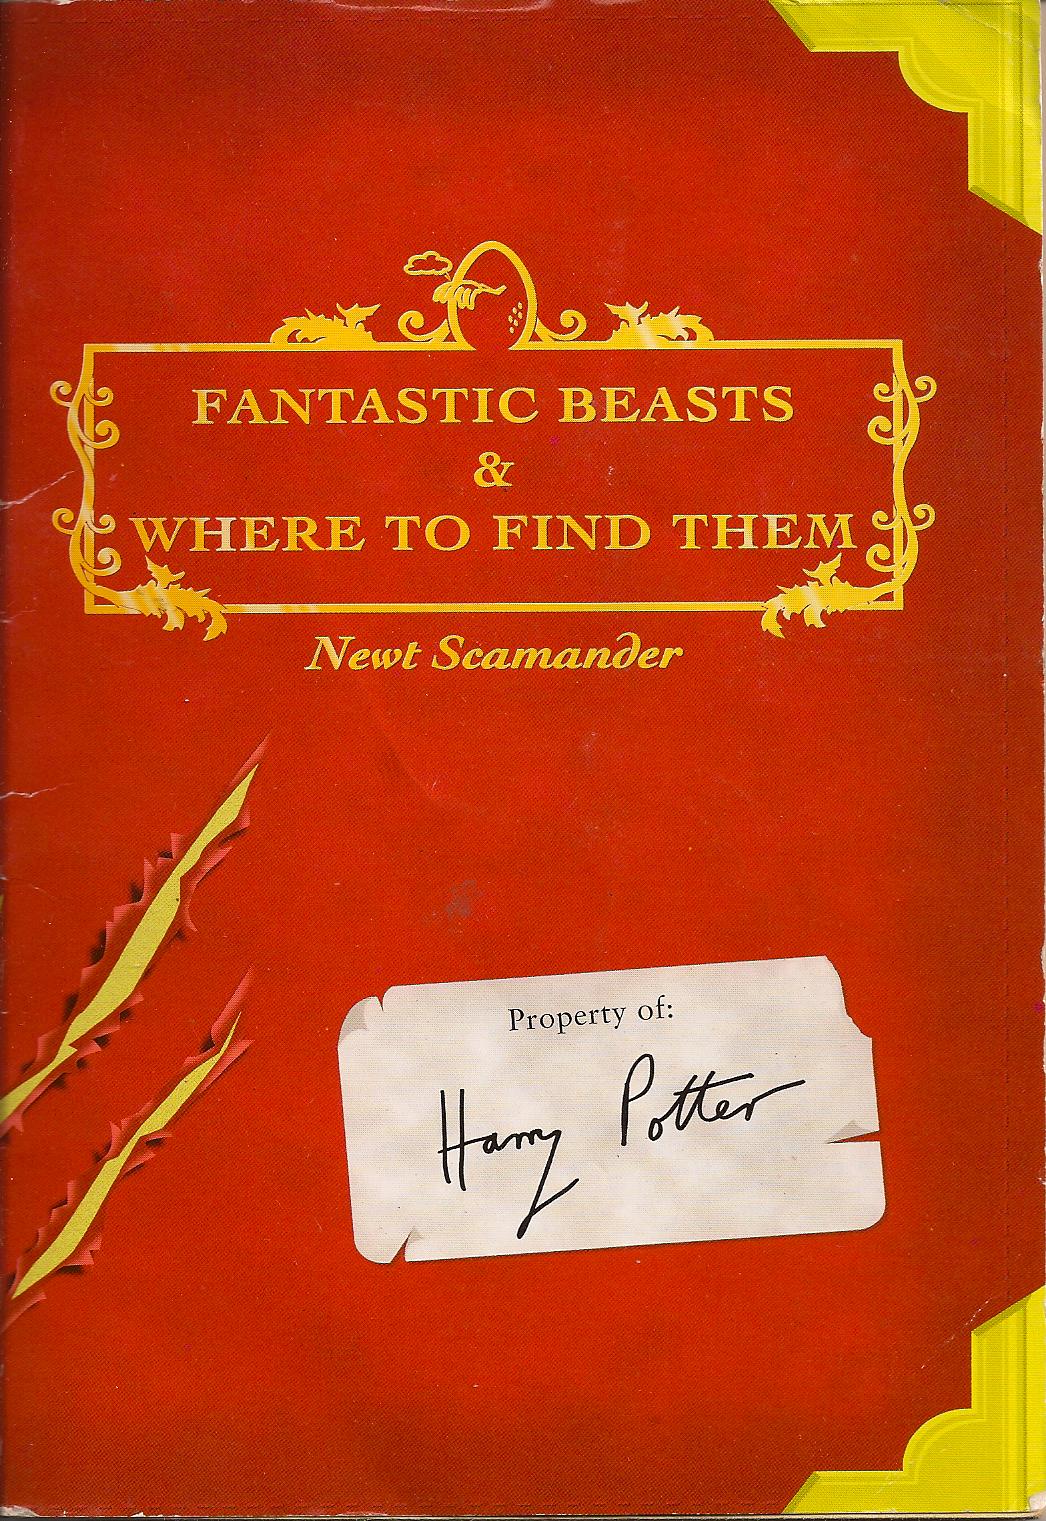 Fantastic Beasts And Where To Find Them Trailer